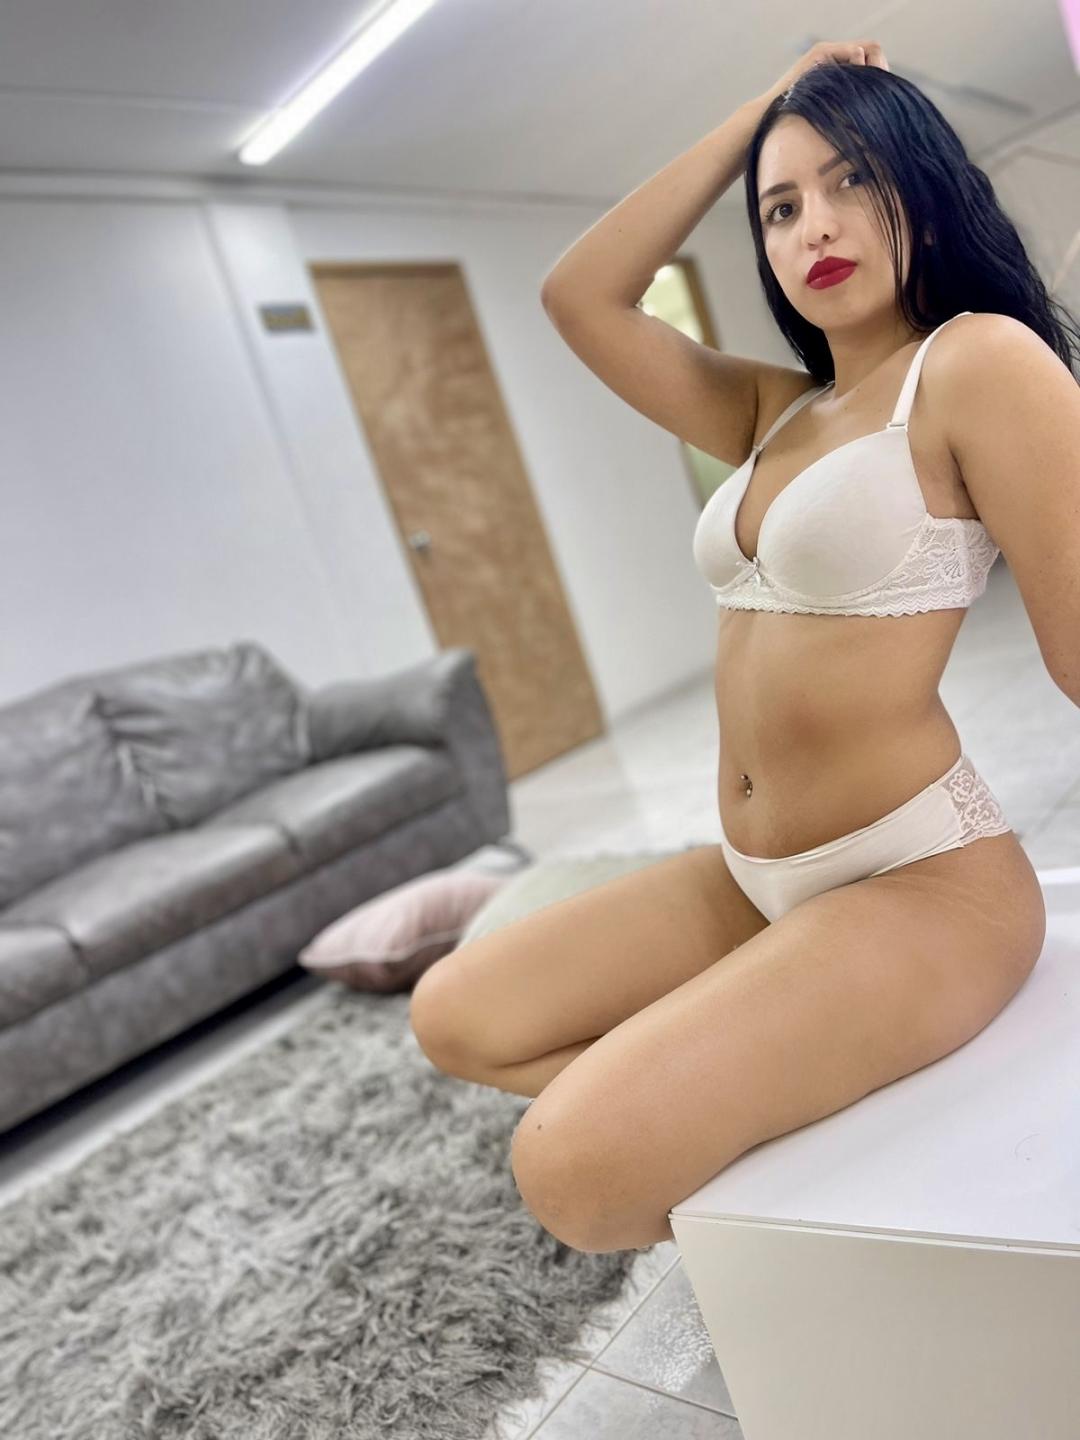 Image of cam model AlmaConor from XloveCam